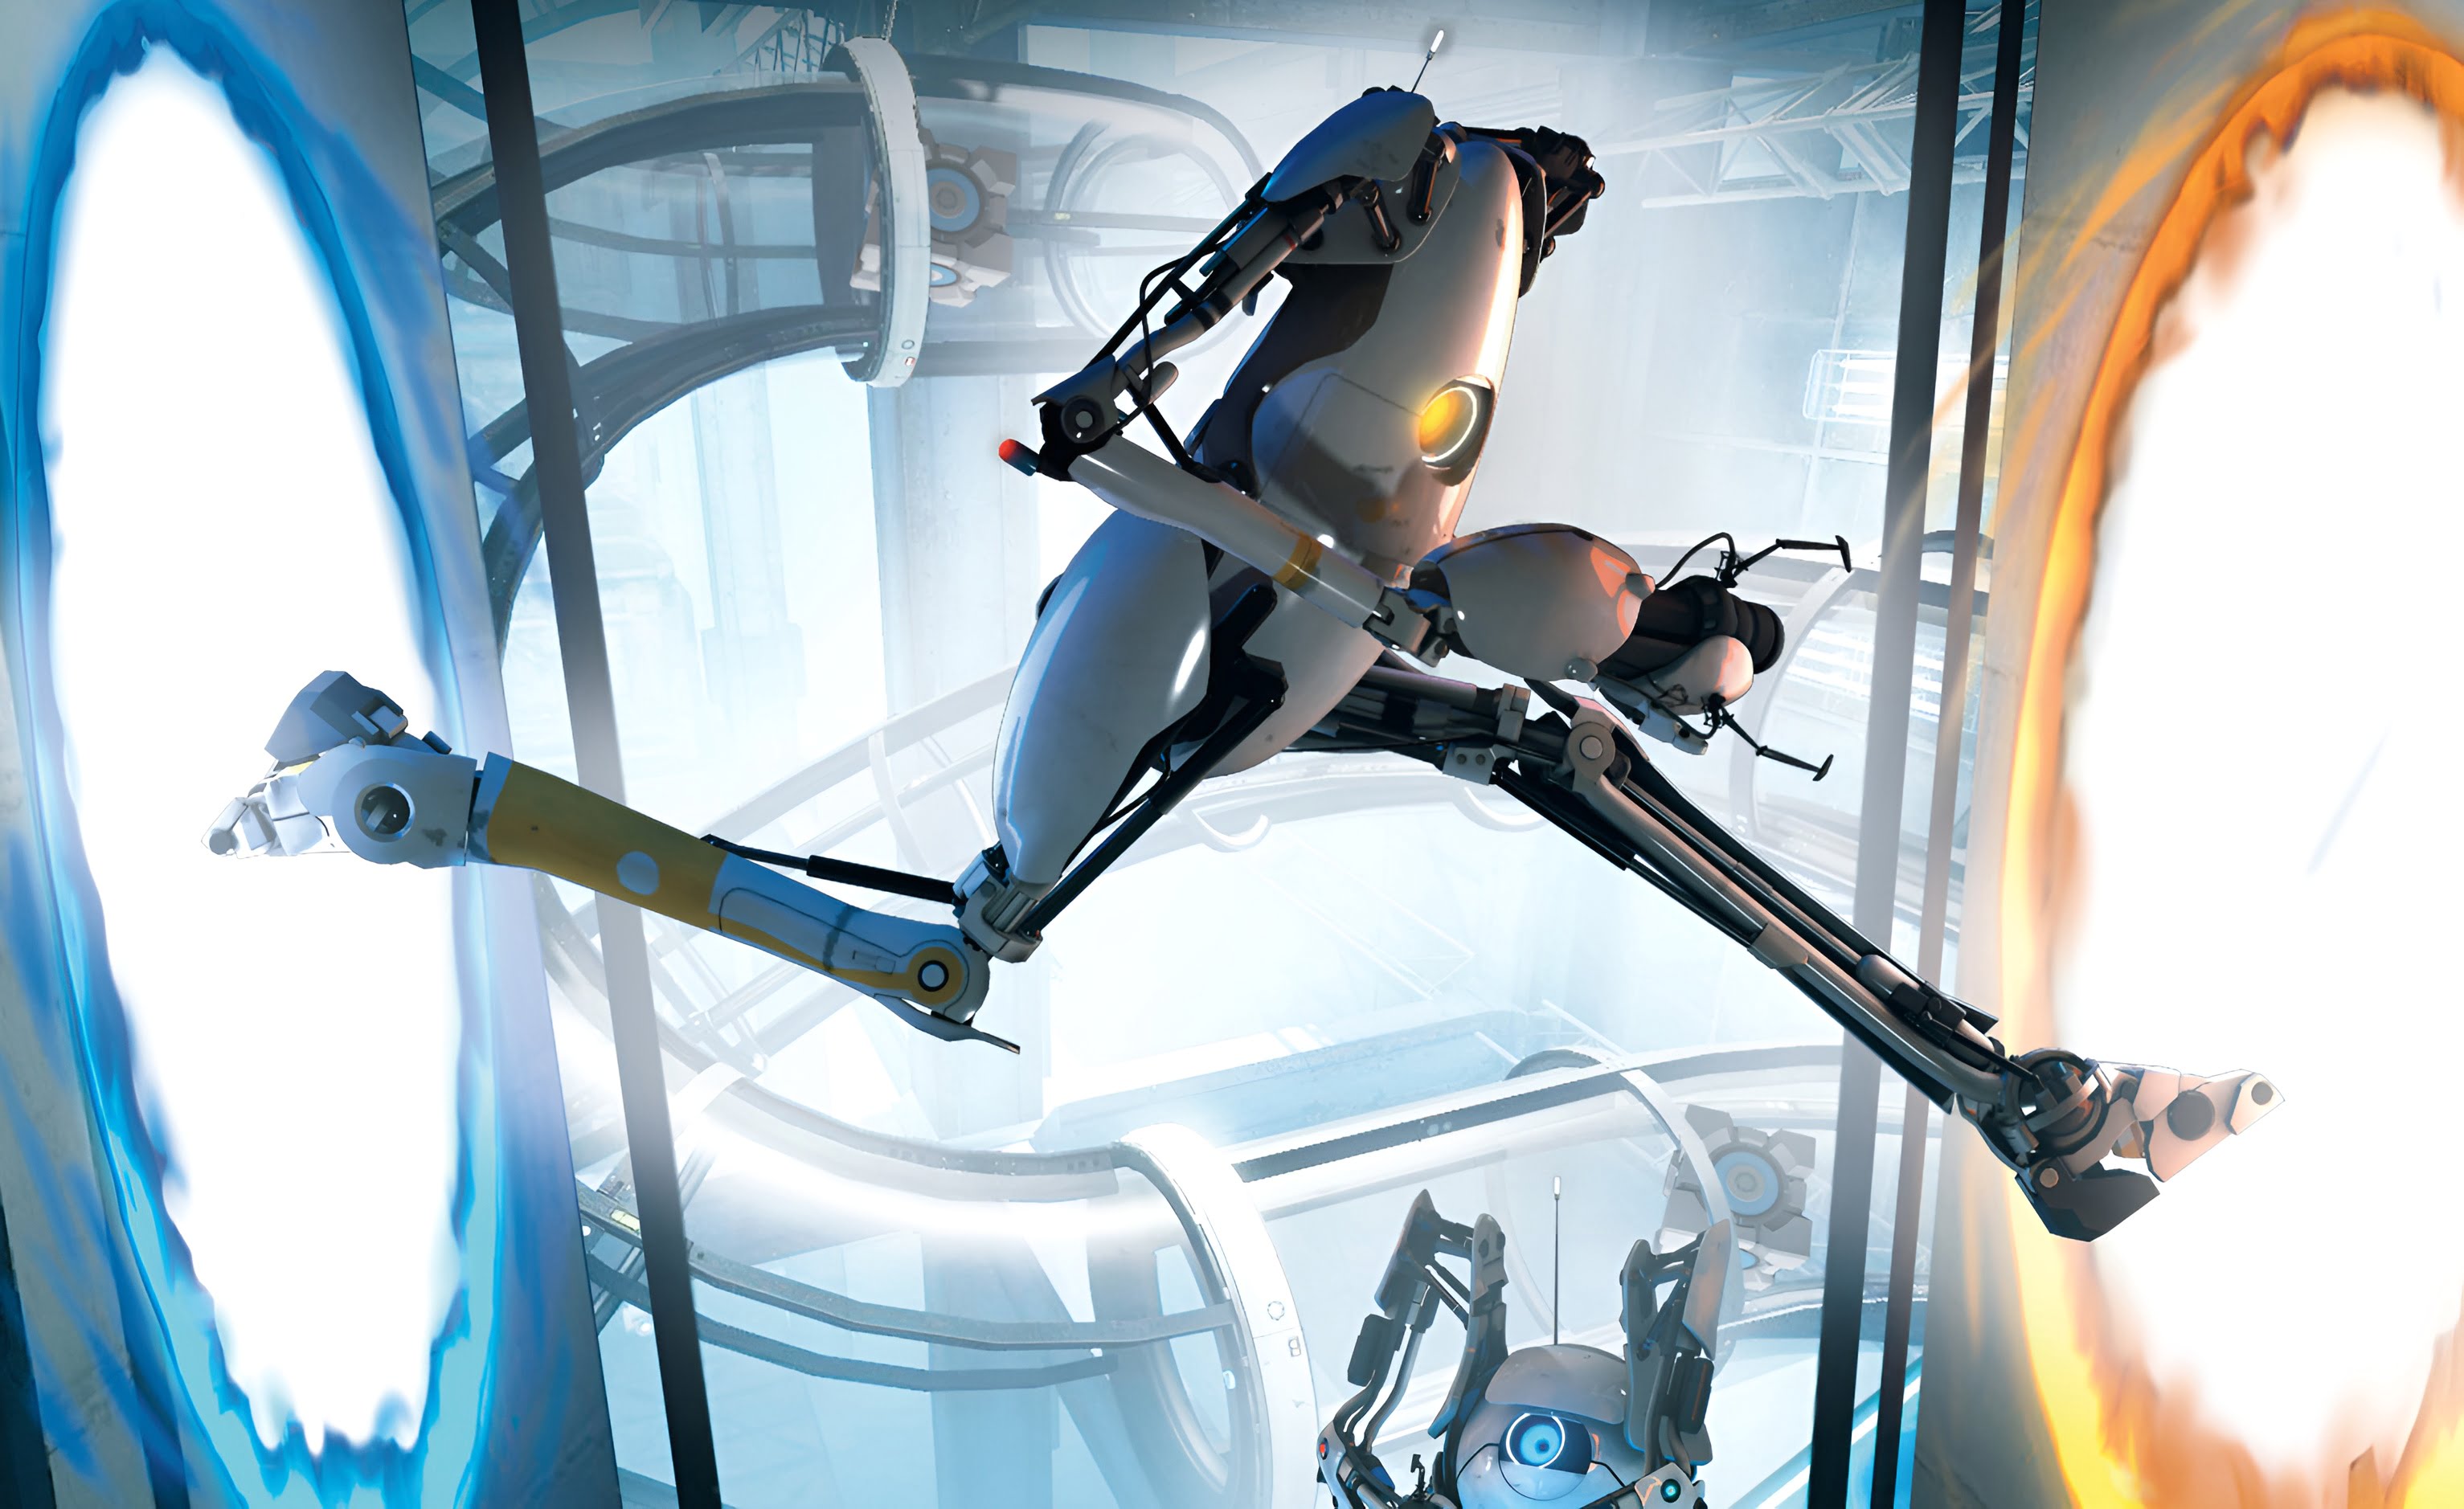 Does Portal 2 work in VR after all? This modder thinks so.